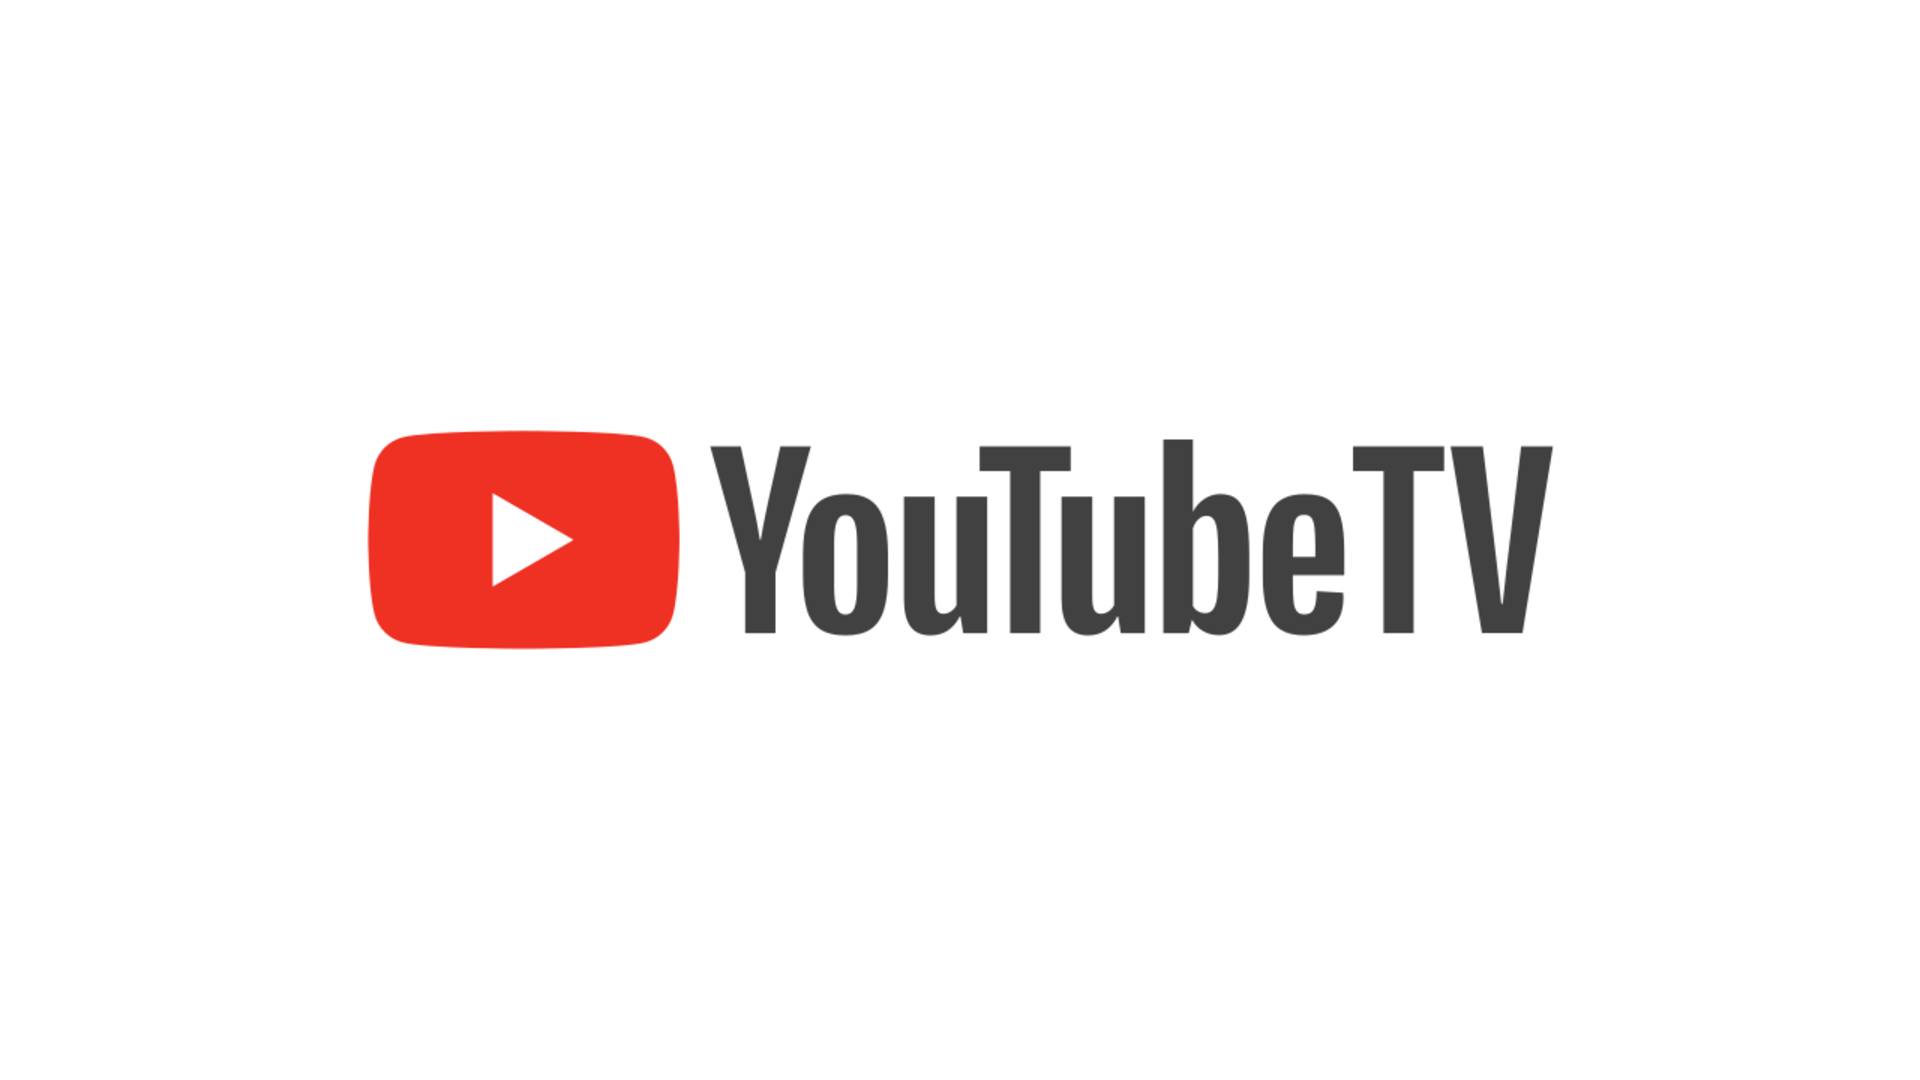 What channels does YouTube TV have?